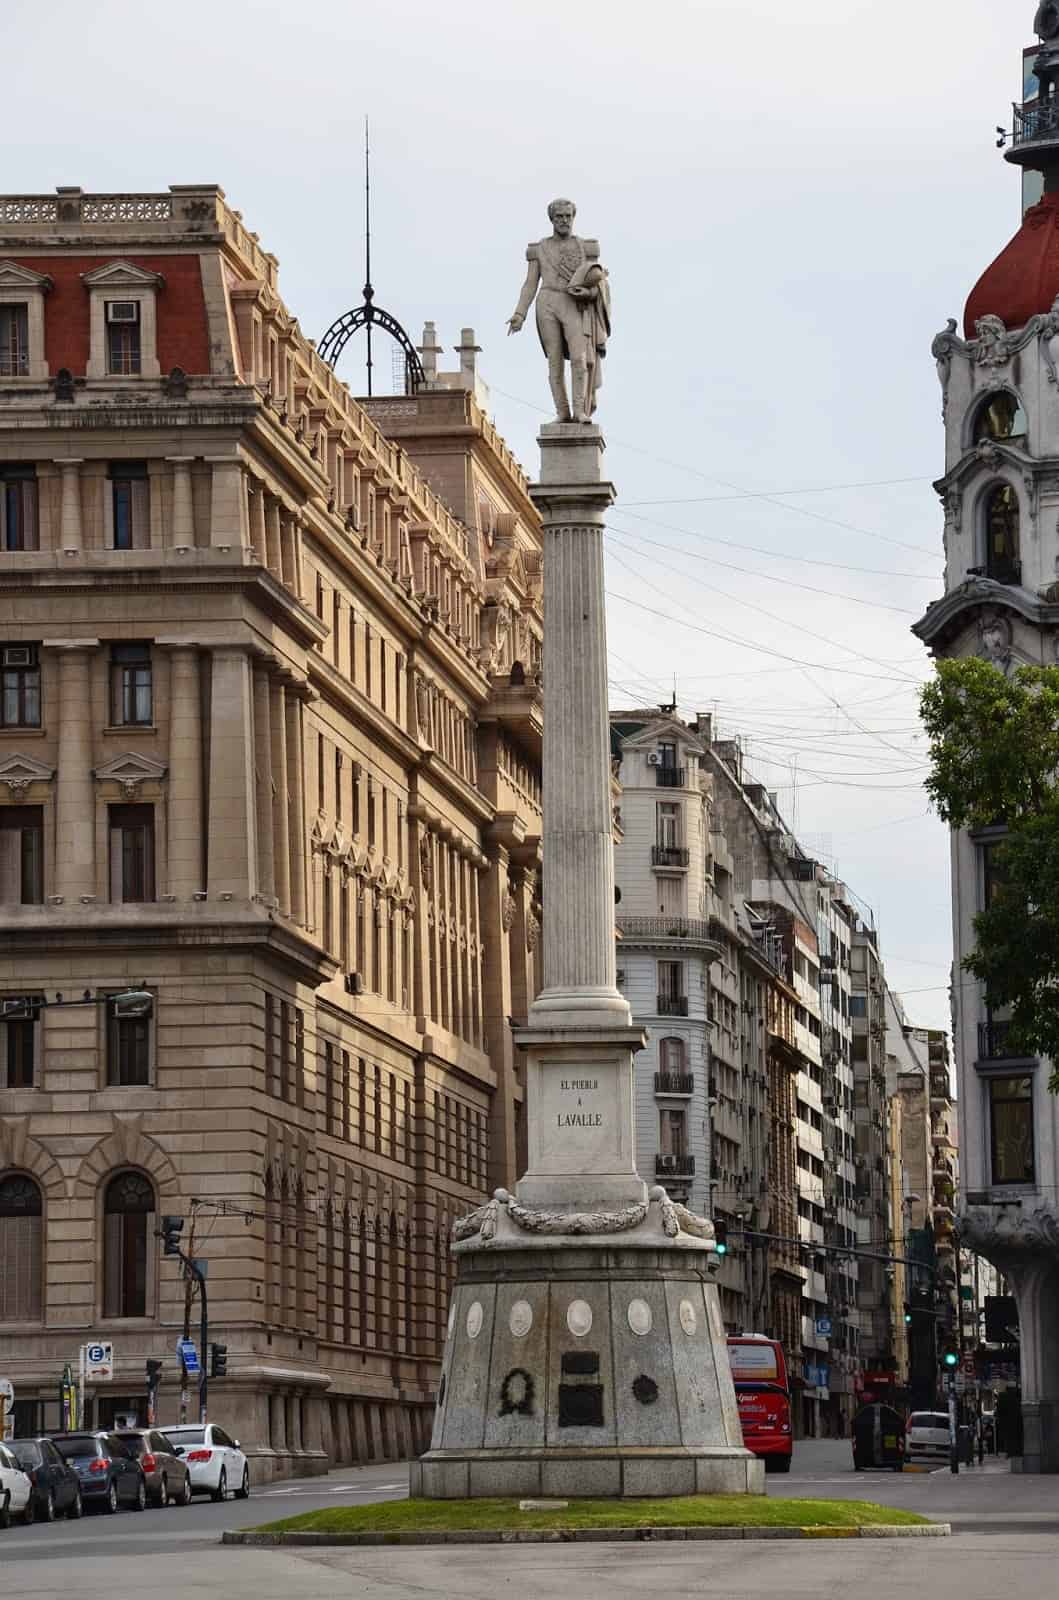 General Lavalle monument in Buenos Aires, Argentina